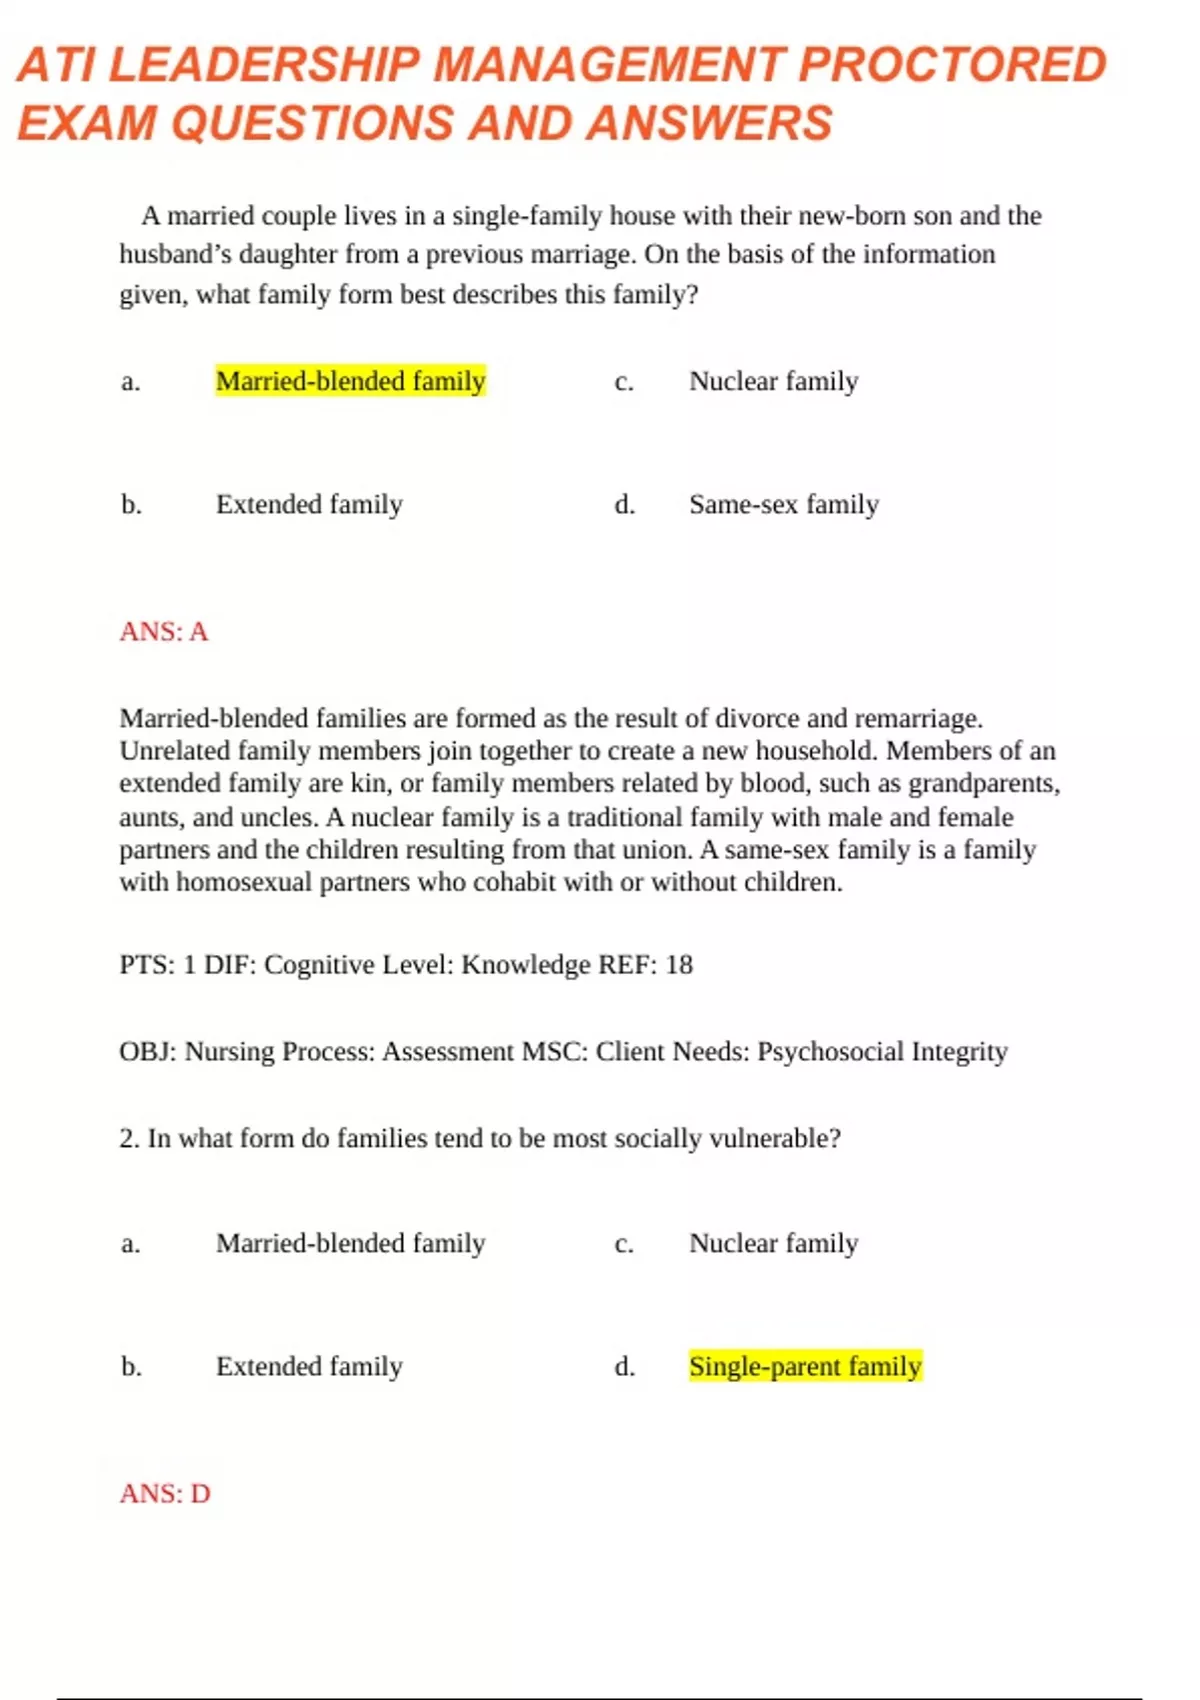 ATI LEADERSHIP MANAGEMENT PROCTORED EXAM QUESTIONS AND ANSWERS UPDATED